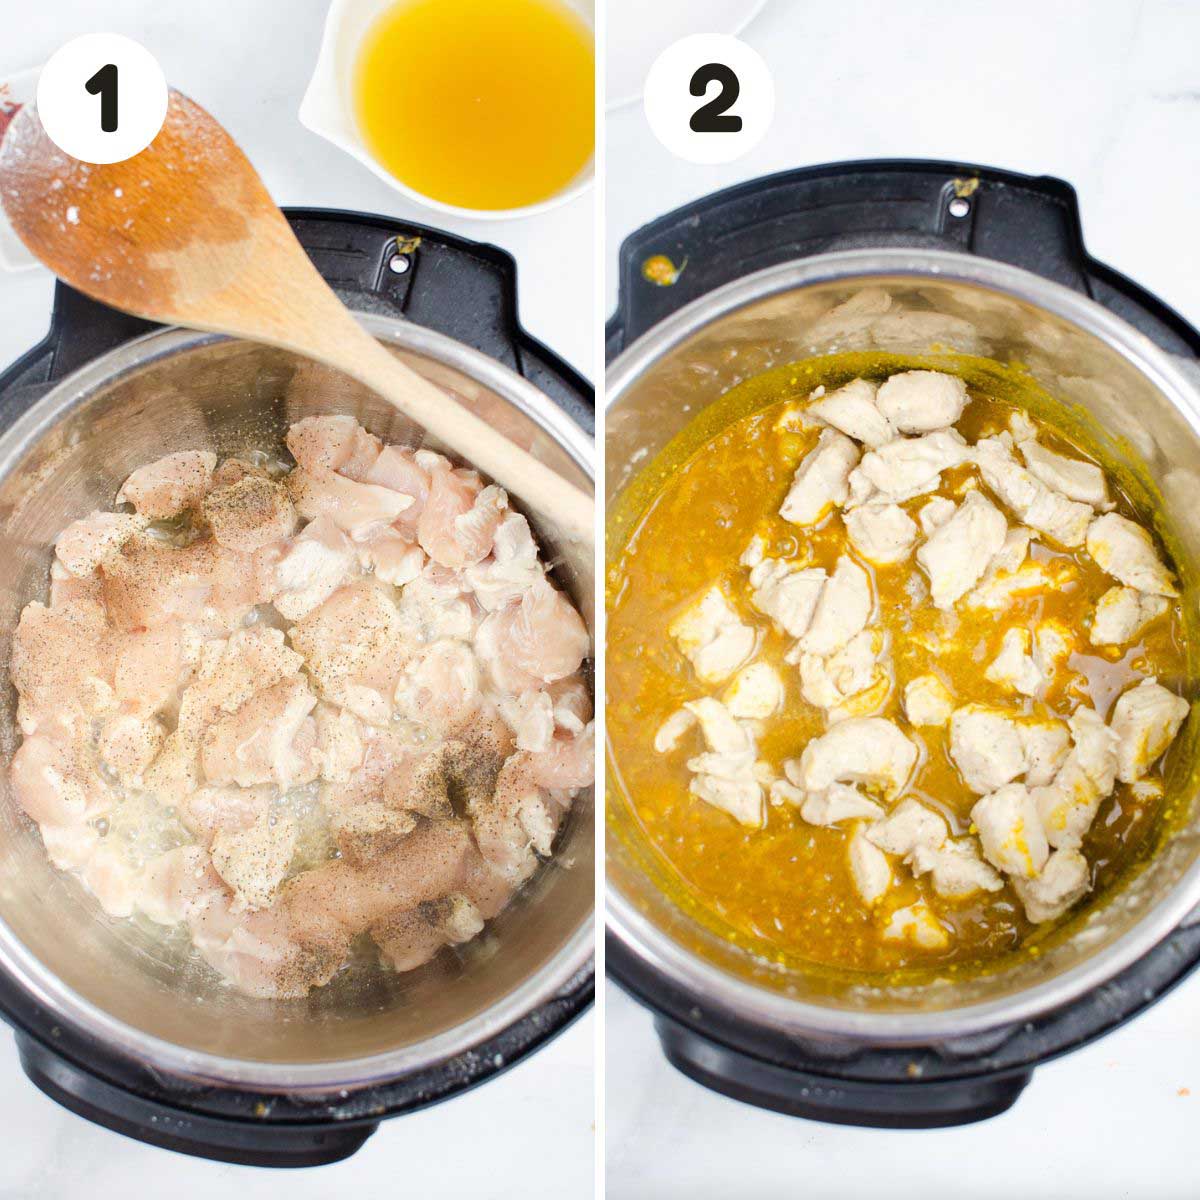 Steps to make the chicken curry.